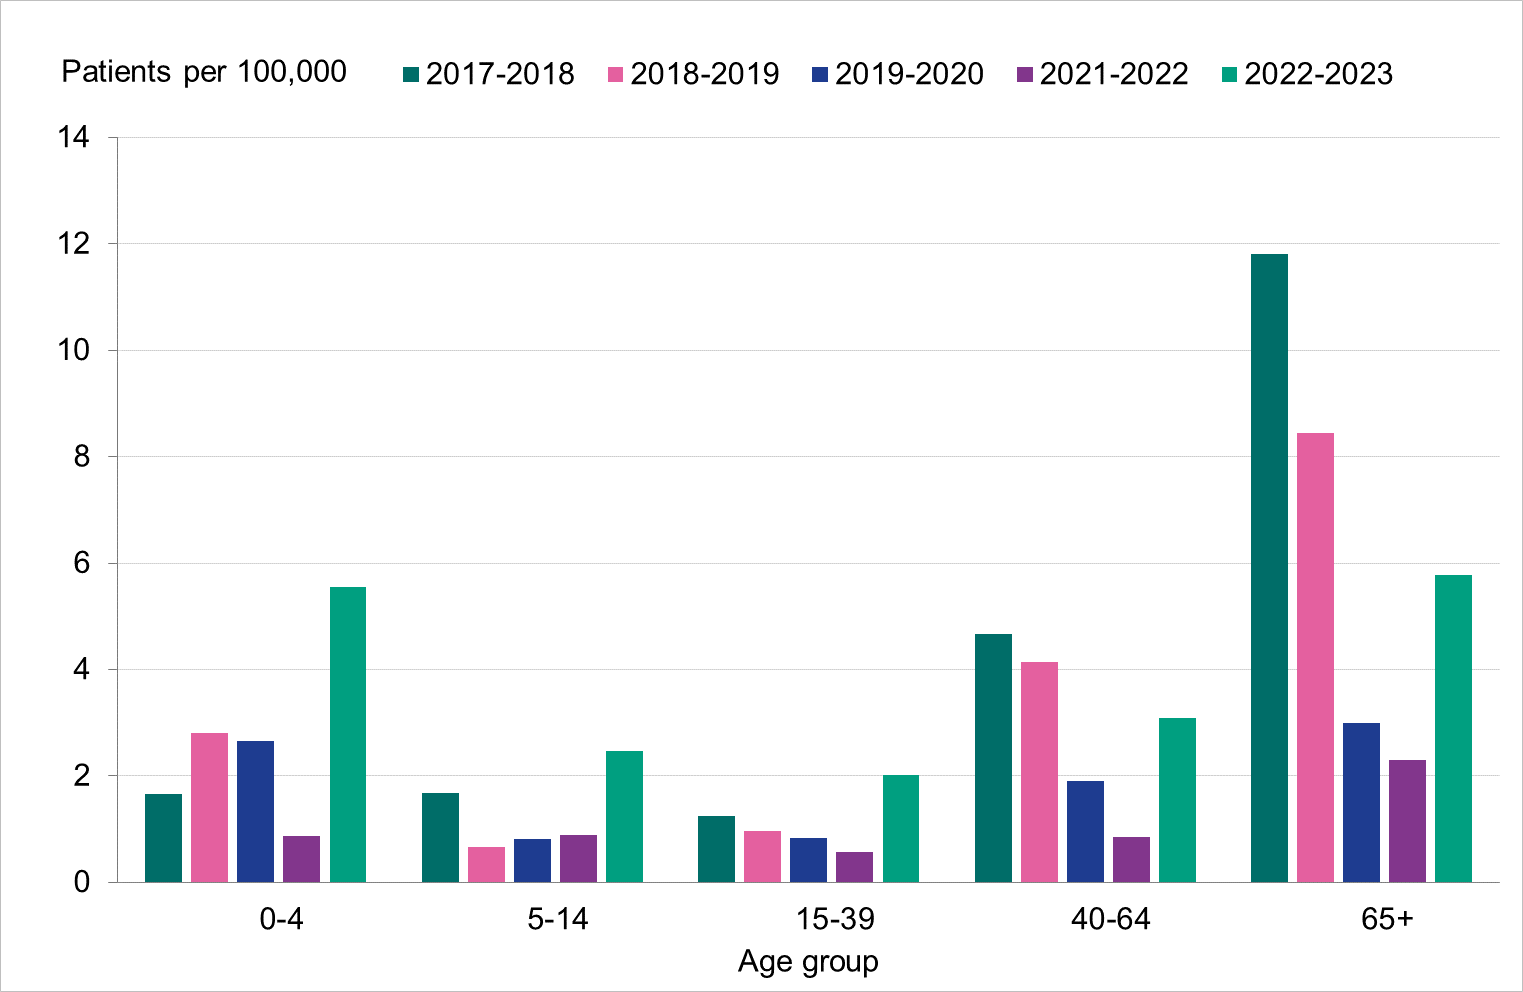 Highest incidence is seen among 65 and older, followed by 40-64, with  2017-2018 being the highest. Children under 5 incidence is at least twice previous seasons in 2022-2023. 